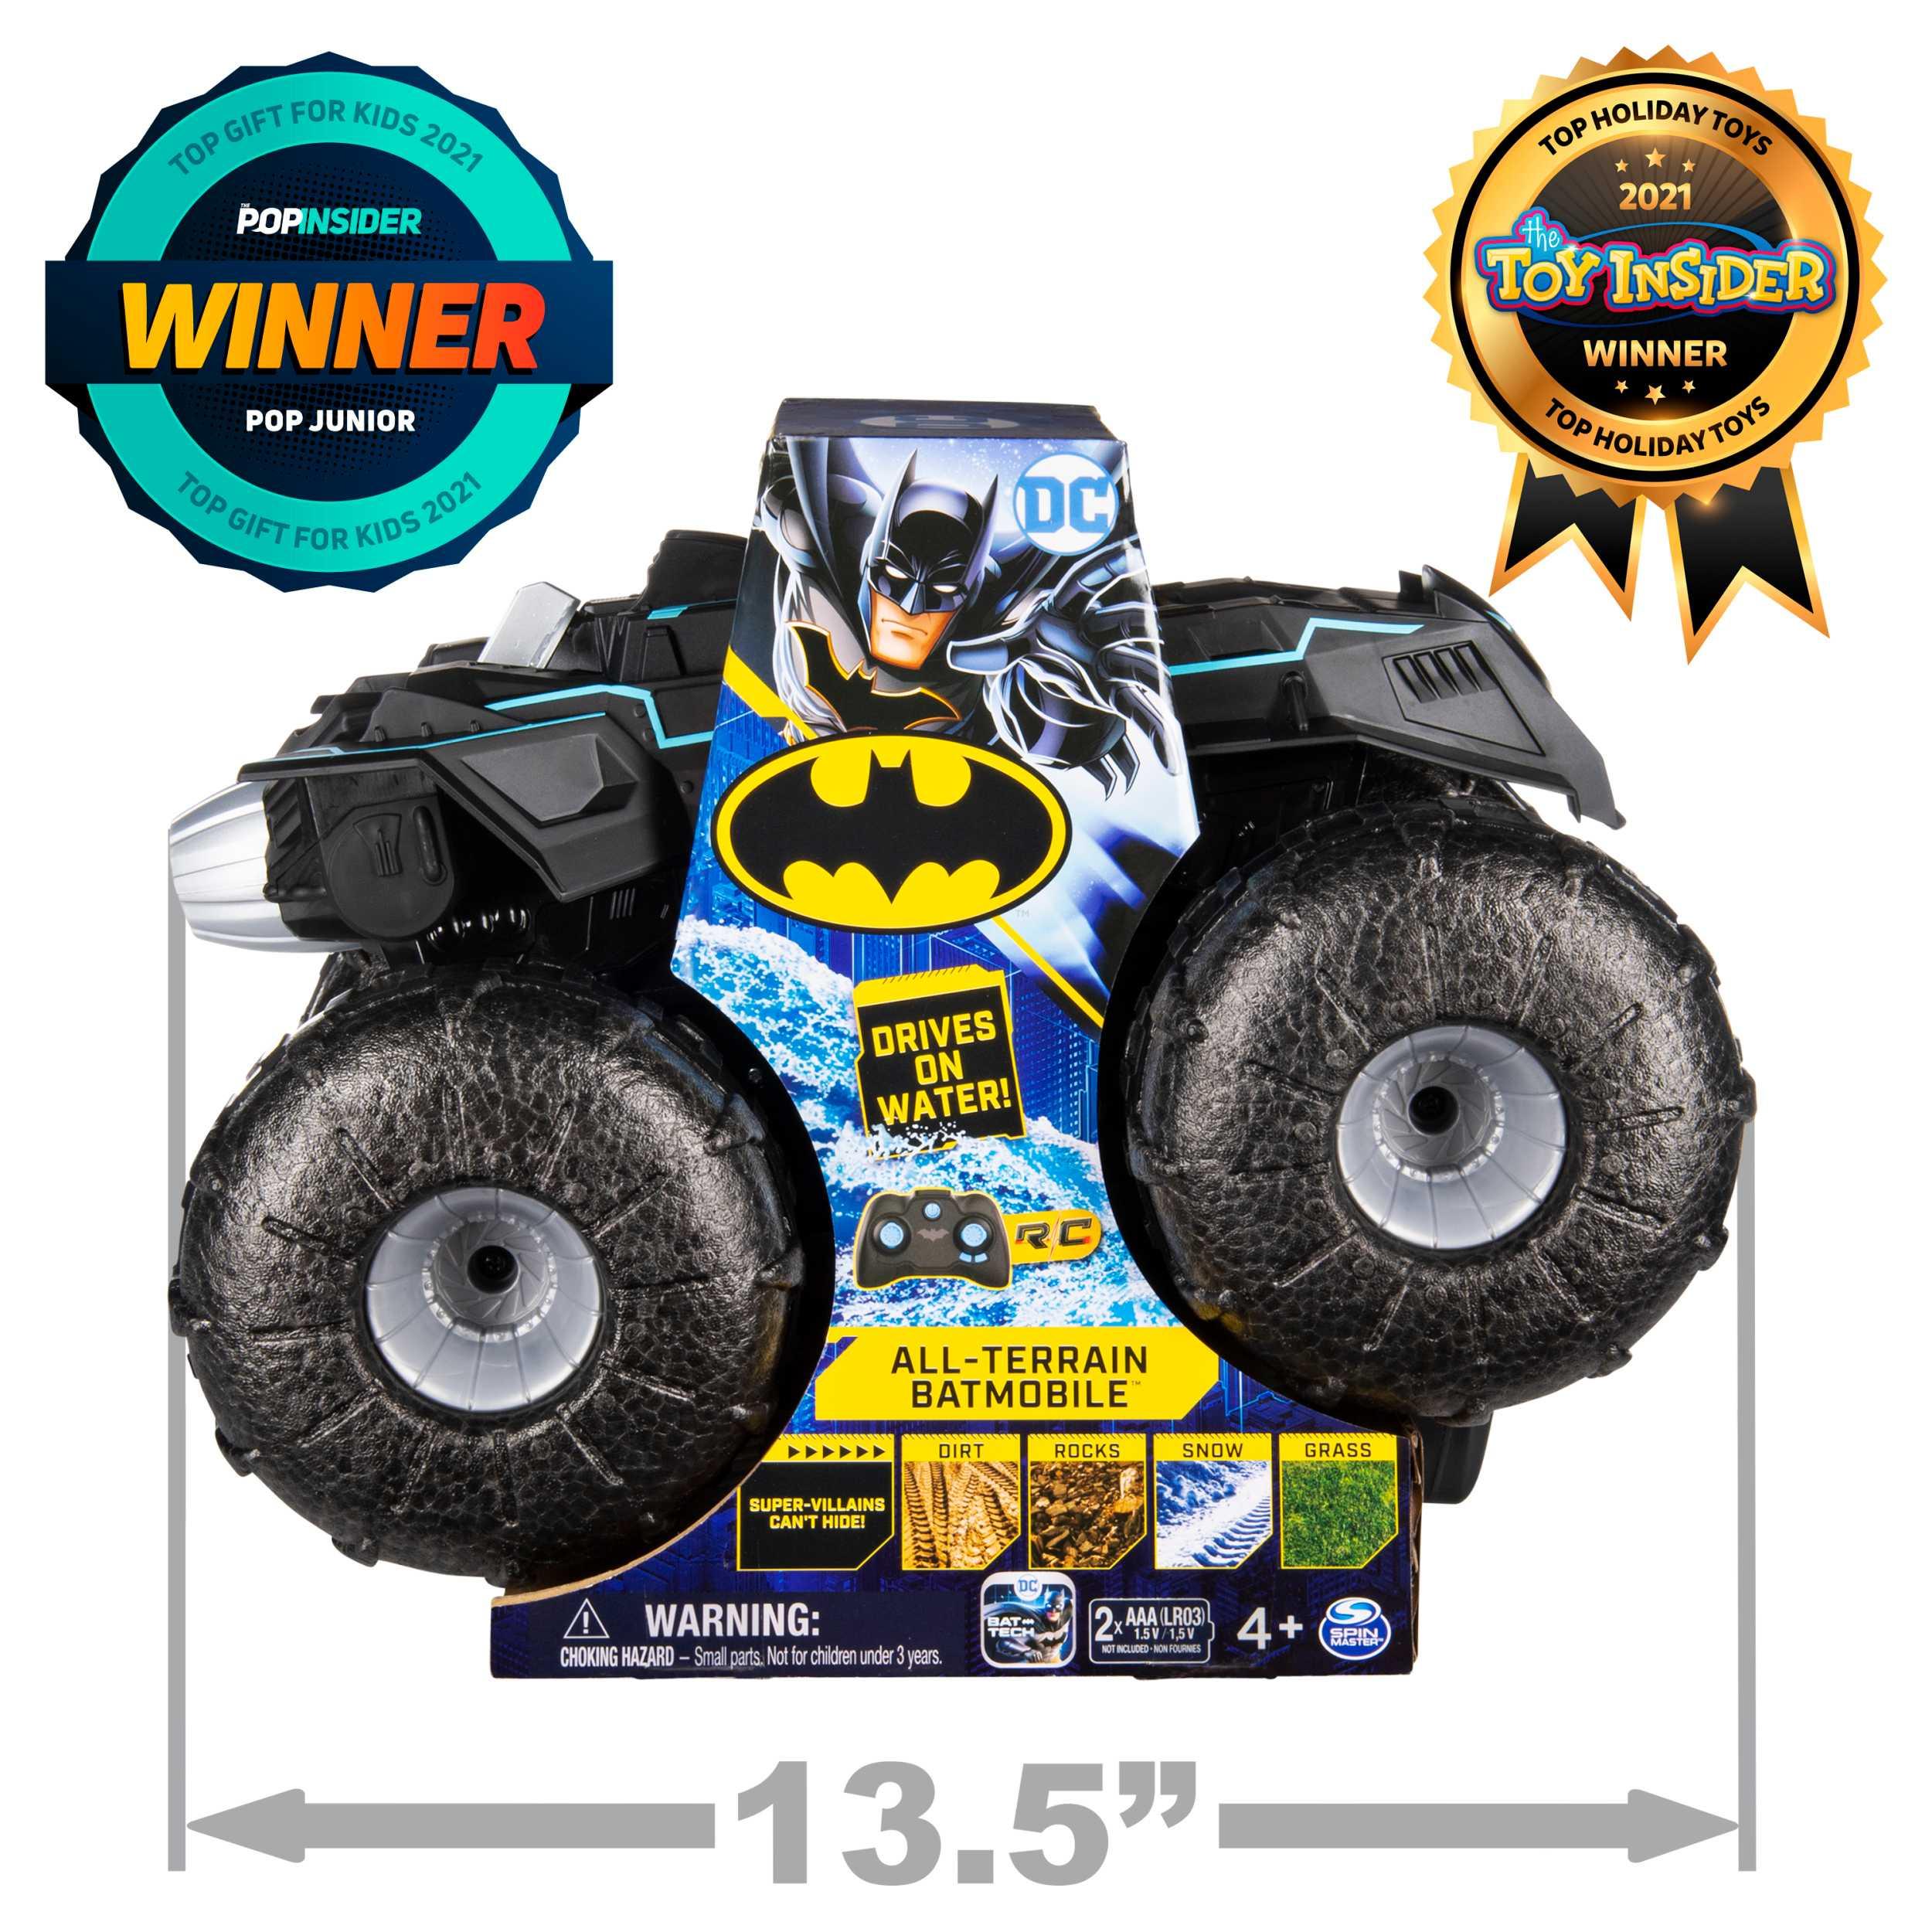 Batman All Terrain Remote Control Car: Compatible with other remote controls and multi-player control systems.